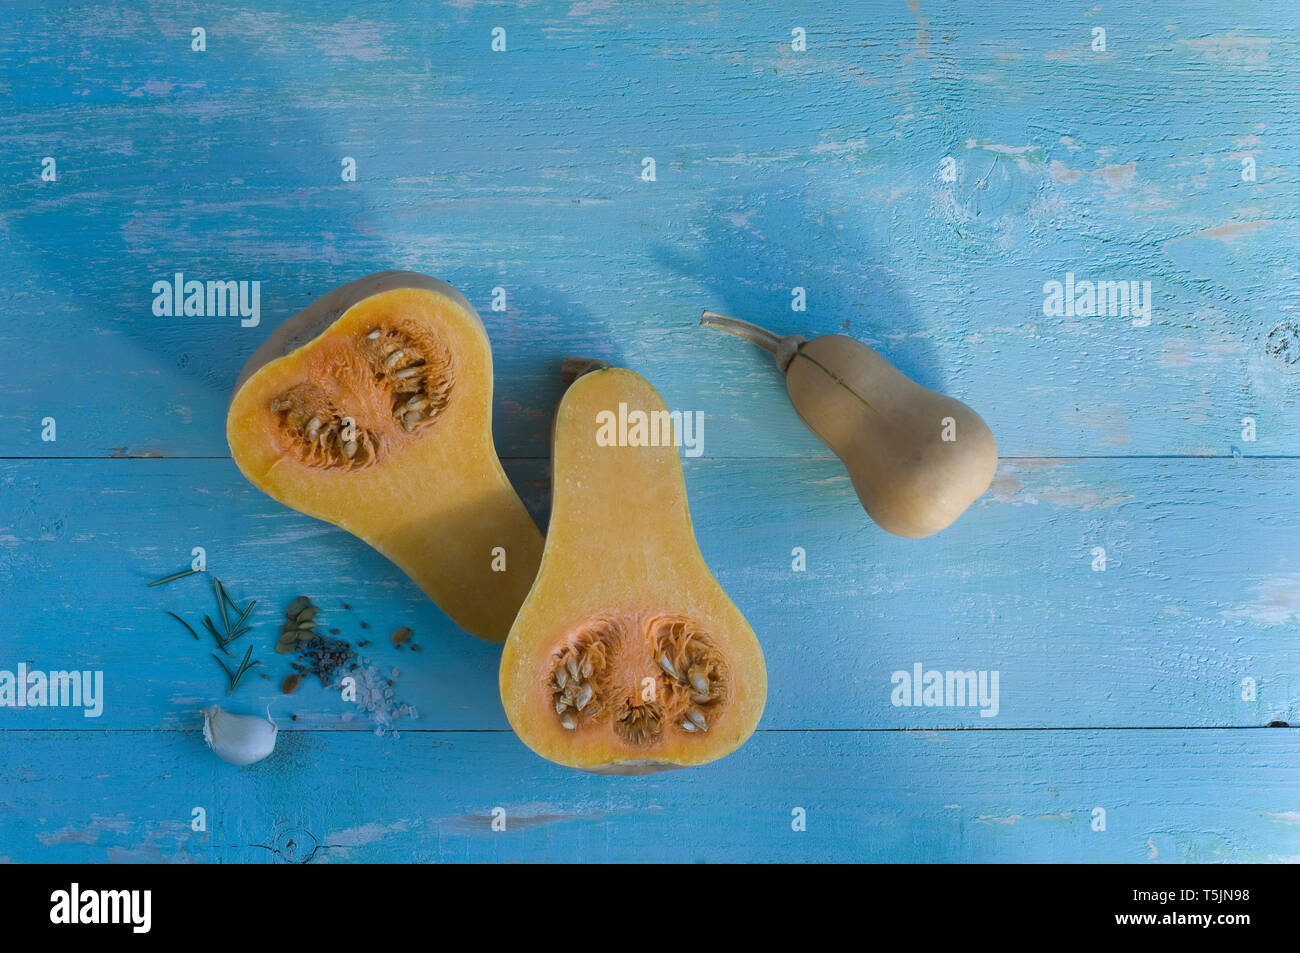 Whole and sliced butternut squash, garlic clove and herbs on light blue wood Stock Photo